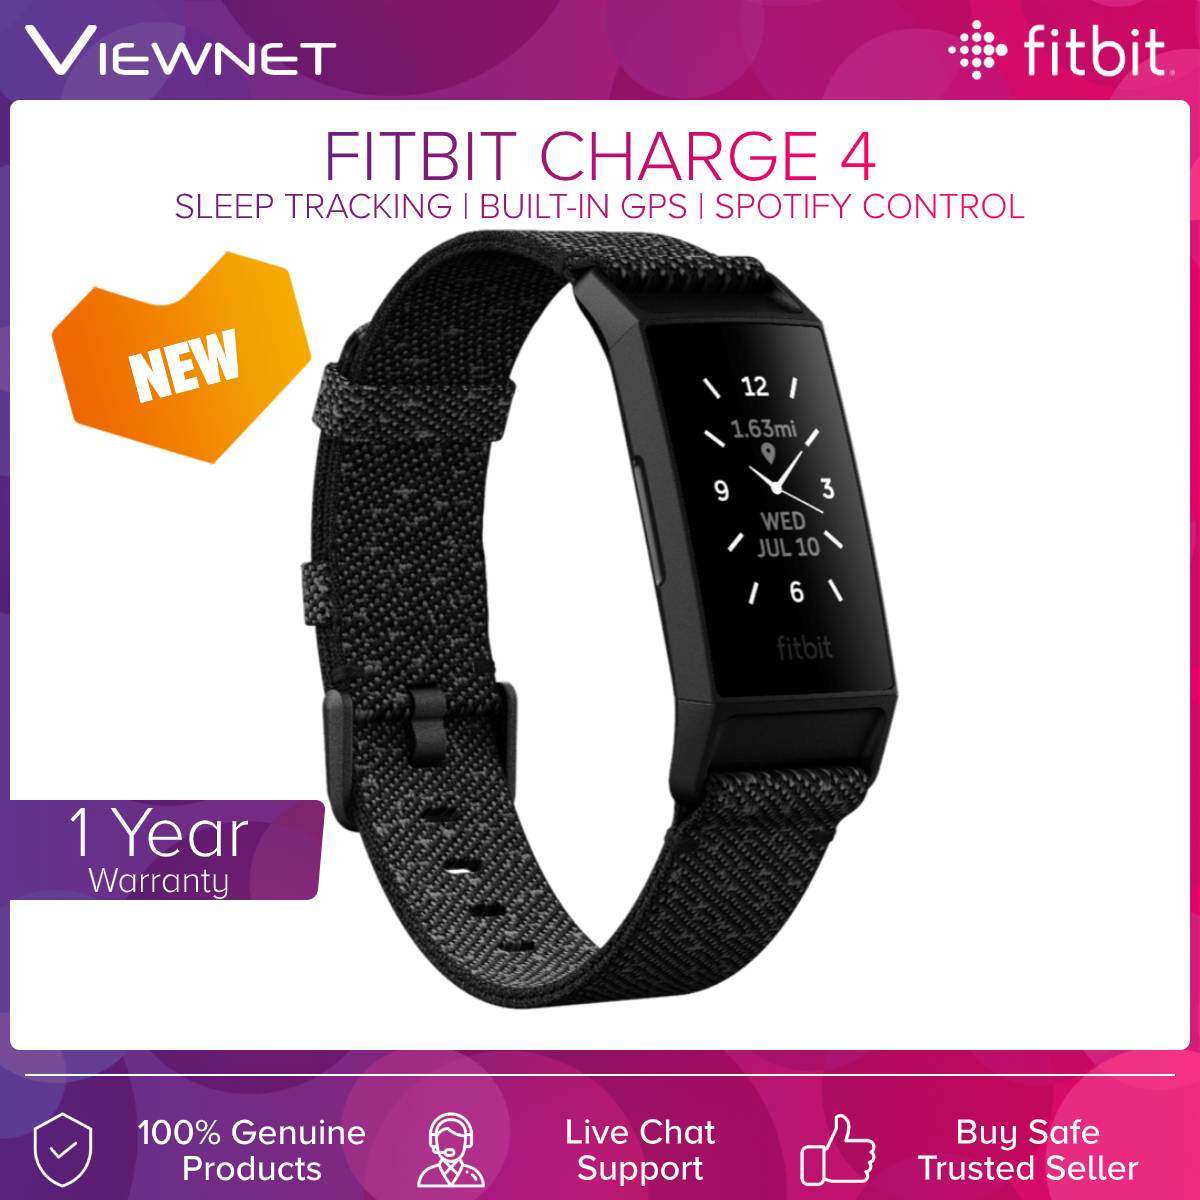 Fitbit Charge 4 Advanced Health & Fitness Tracker Smartwatch with Built-in GPS 24/7 Heart Rate Tracking